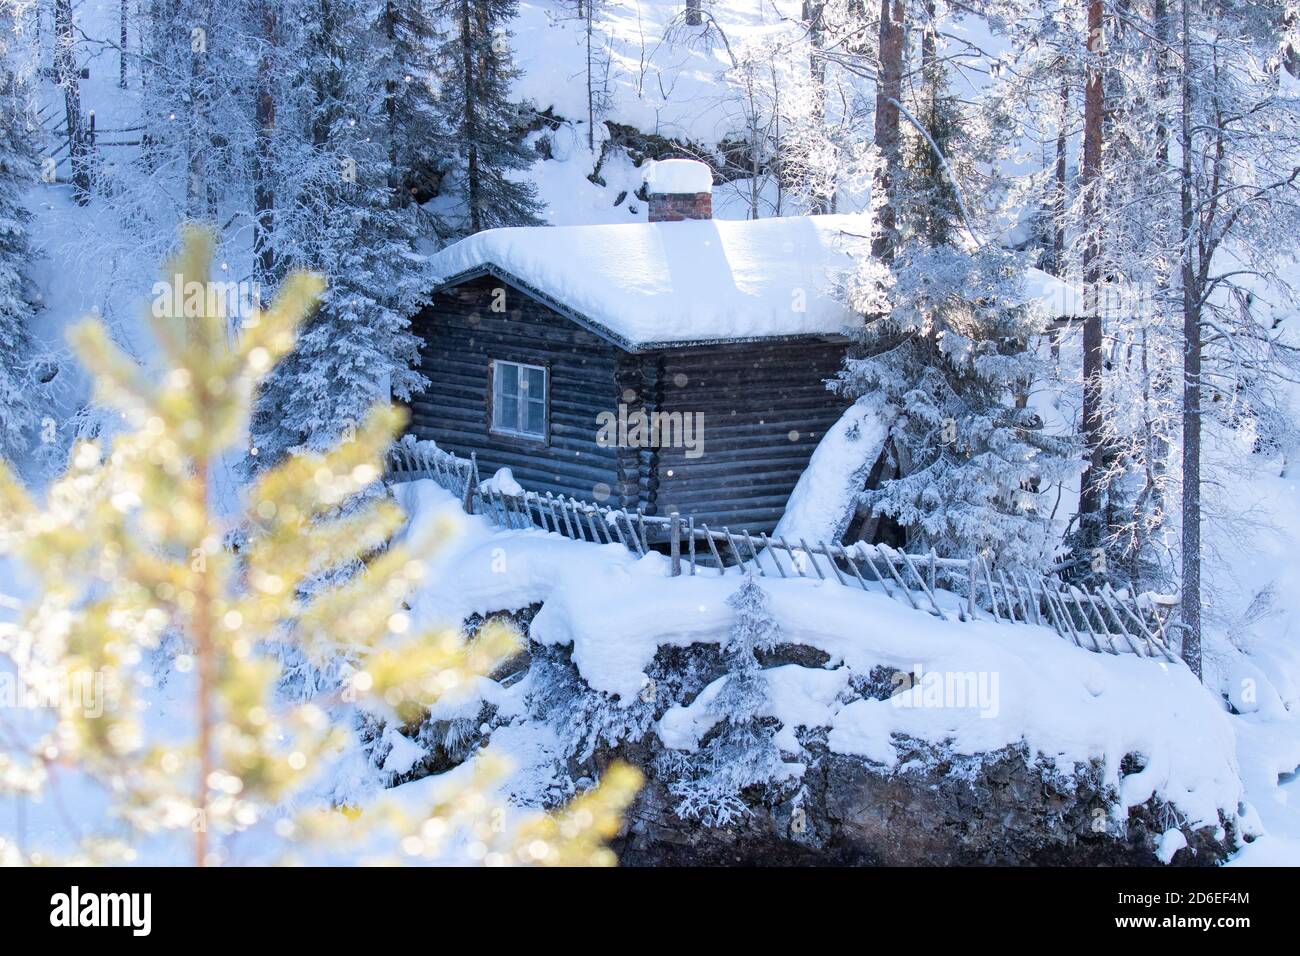 A small cozy wintery cabin by the river in Finnish taiga forest, Northern Europe. Stock Photo